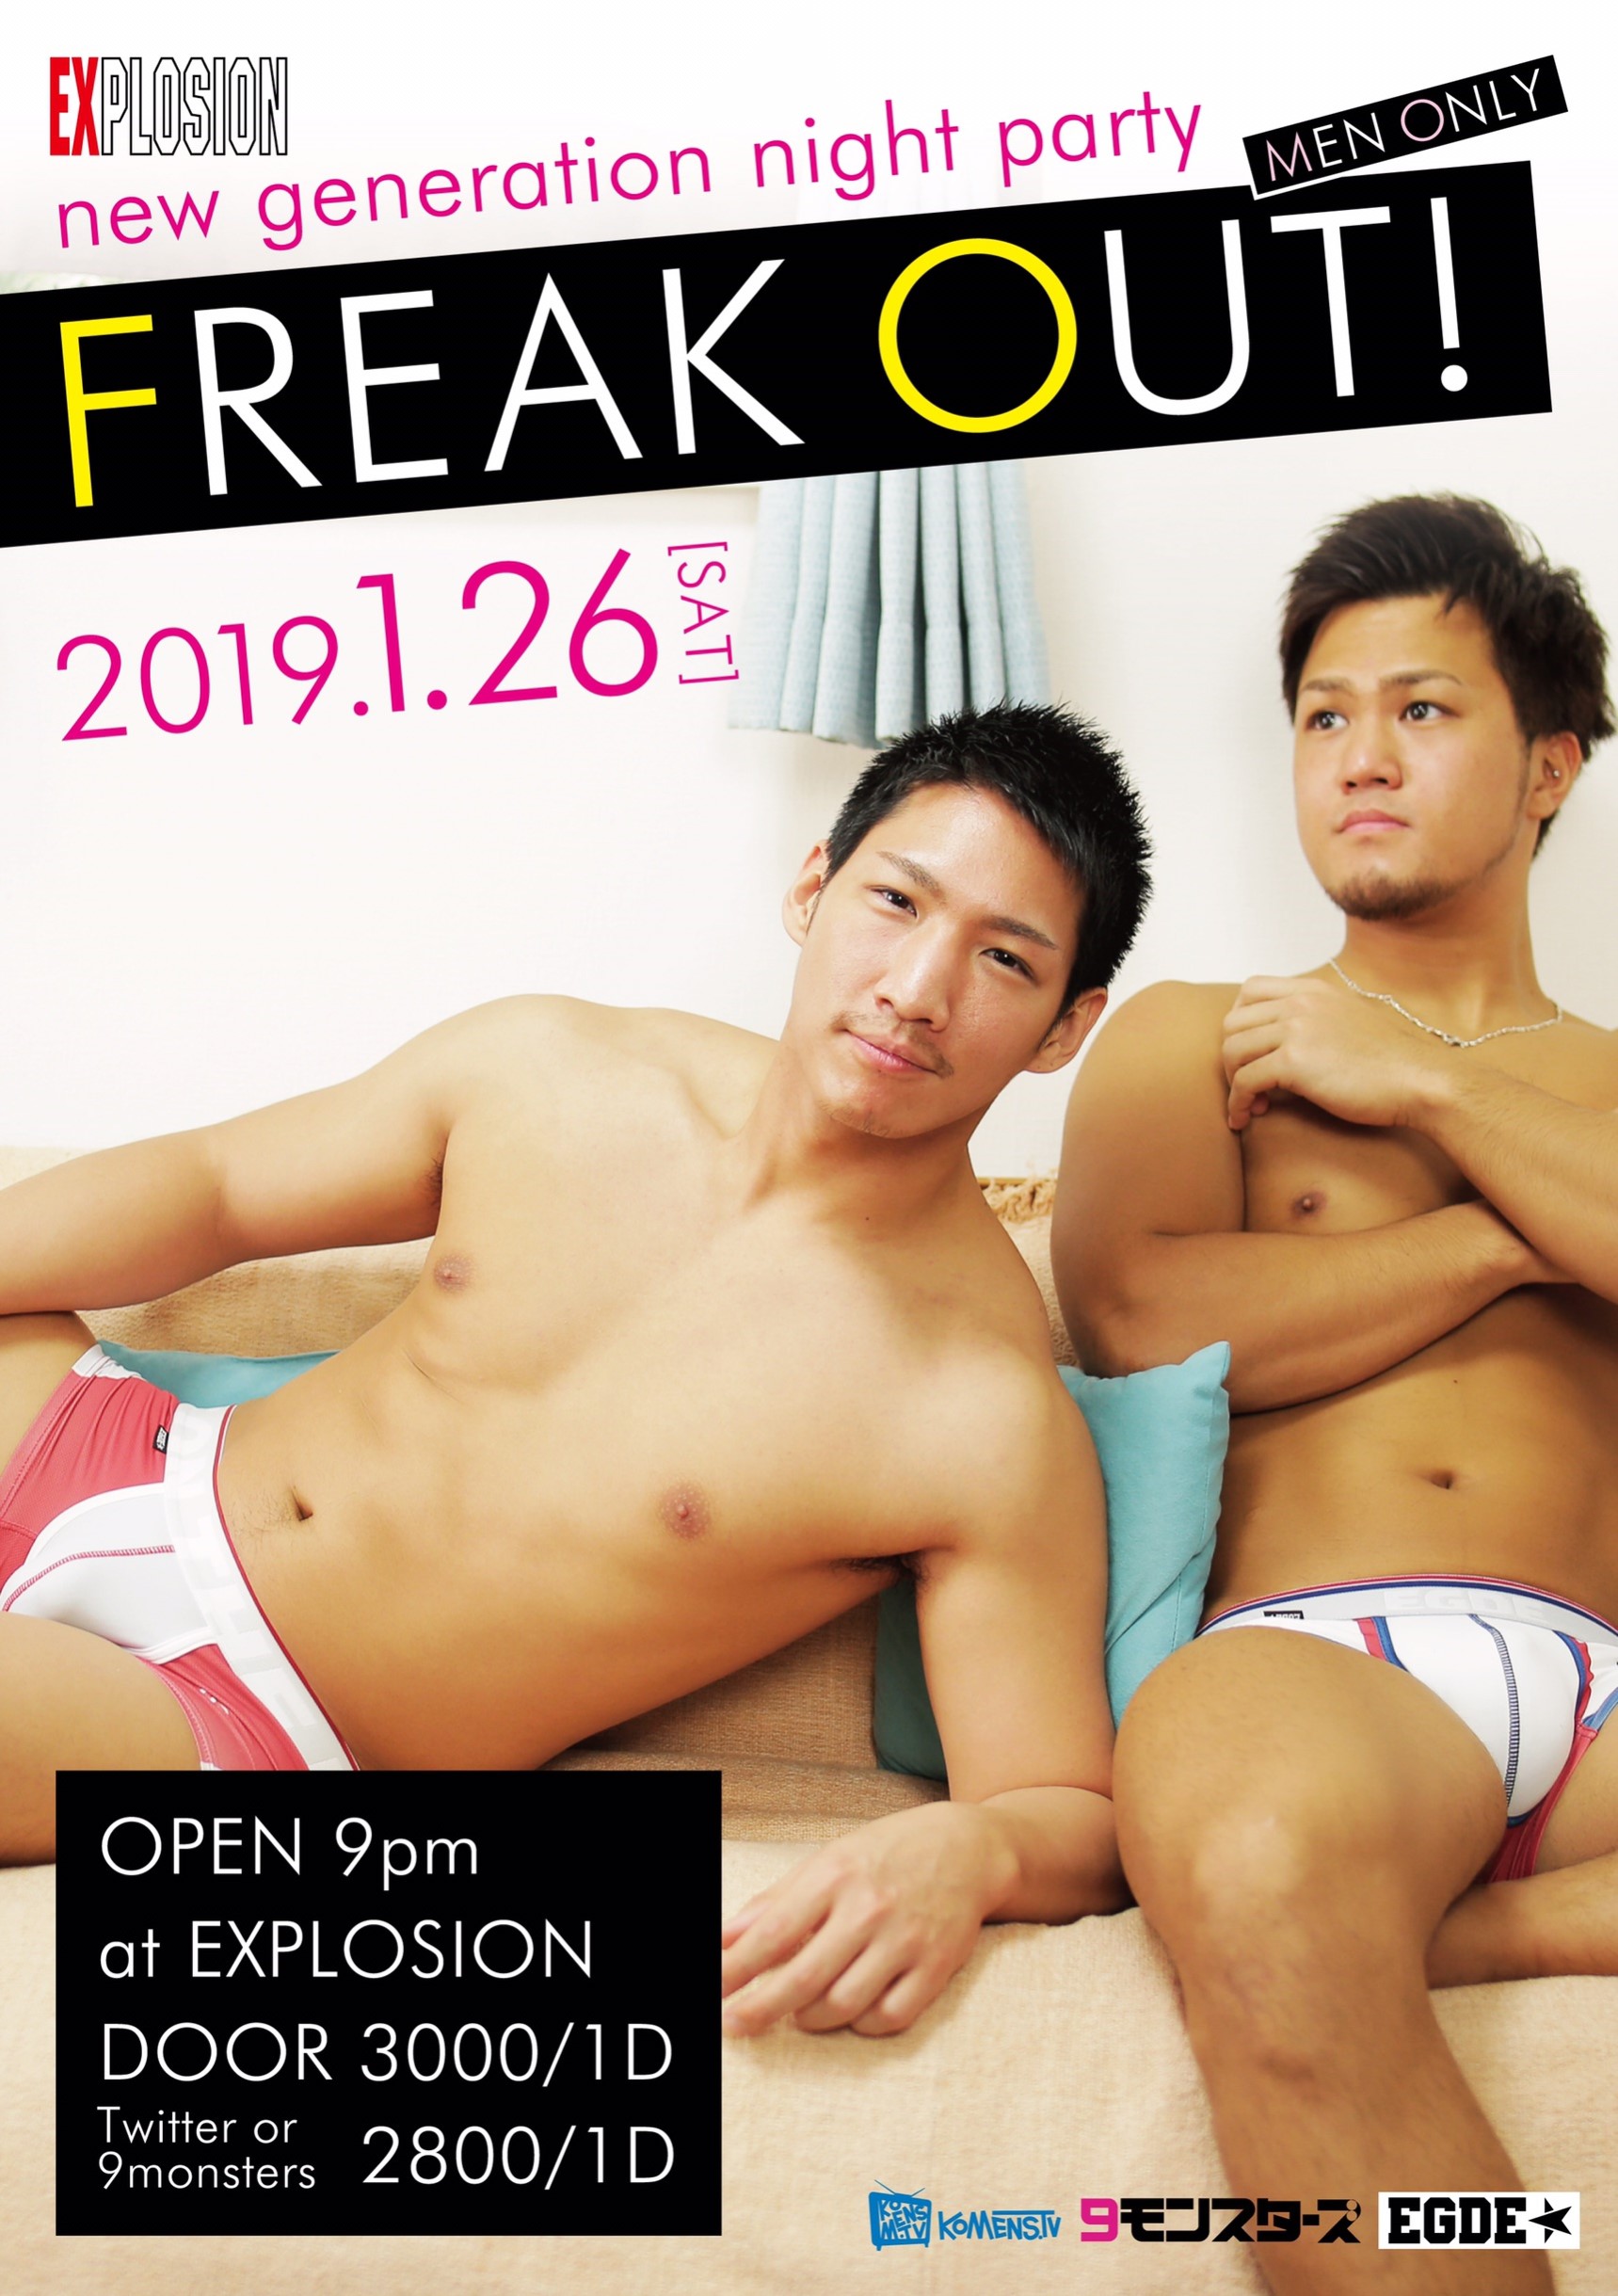 1/26(SAT) 21:00～5:00 new generation night party FREAK OUT! ＜MEN ONLY＞